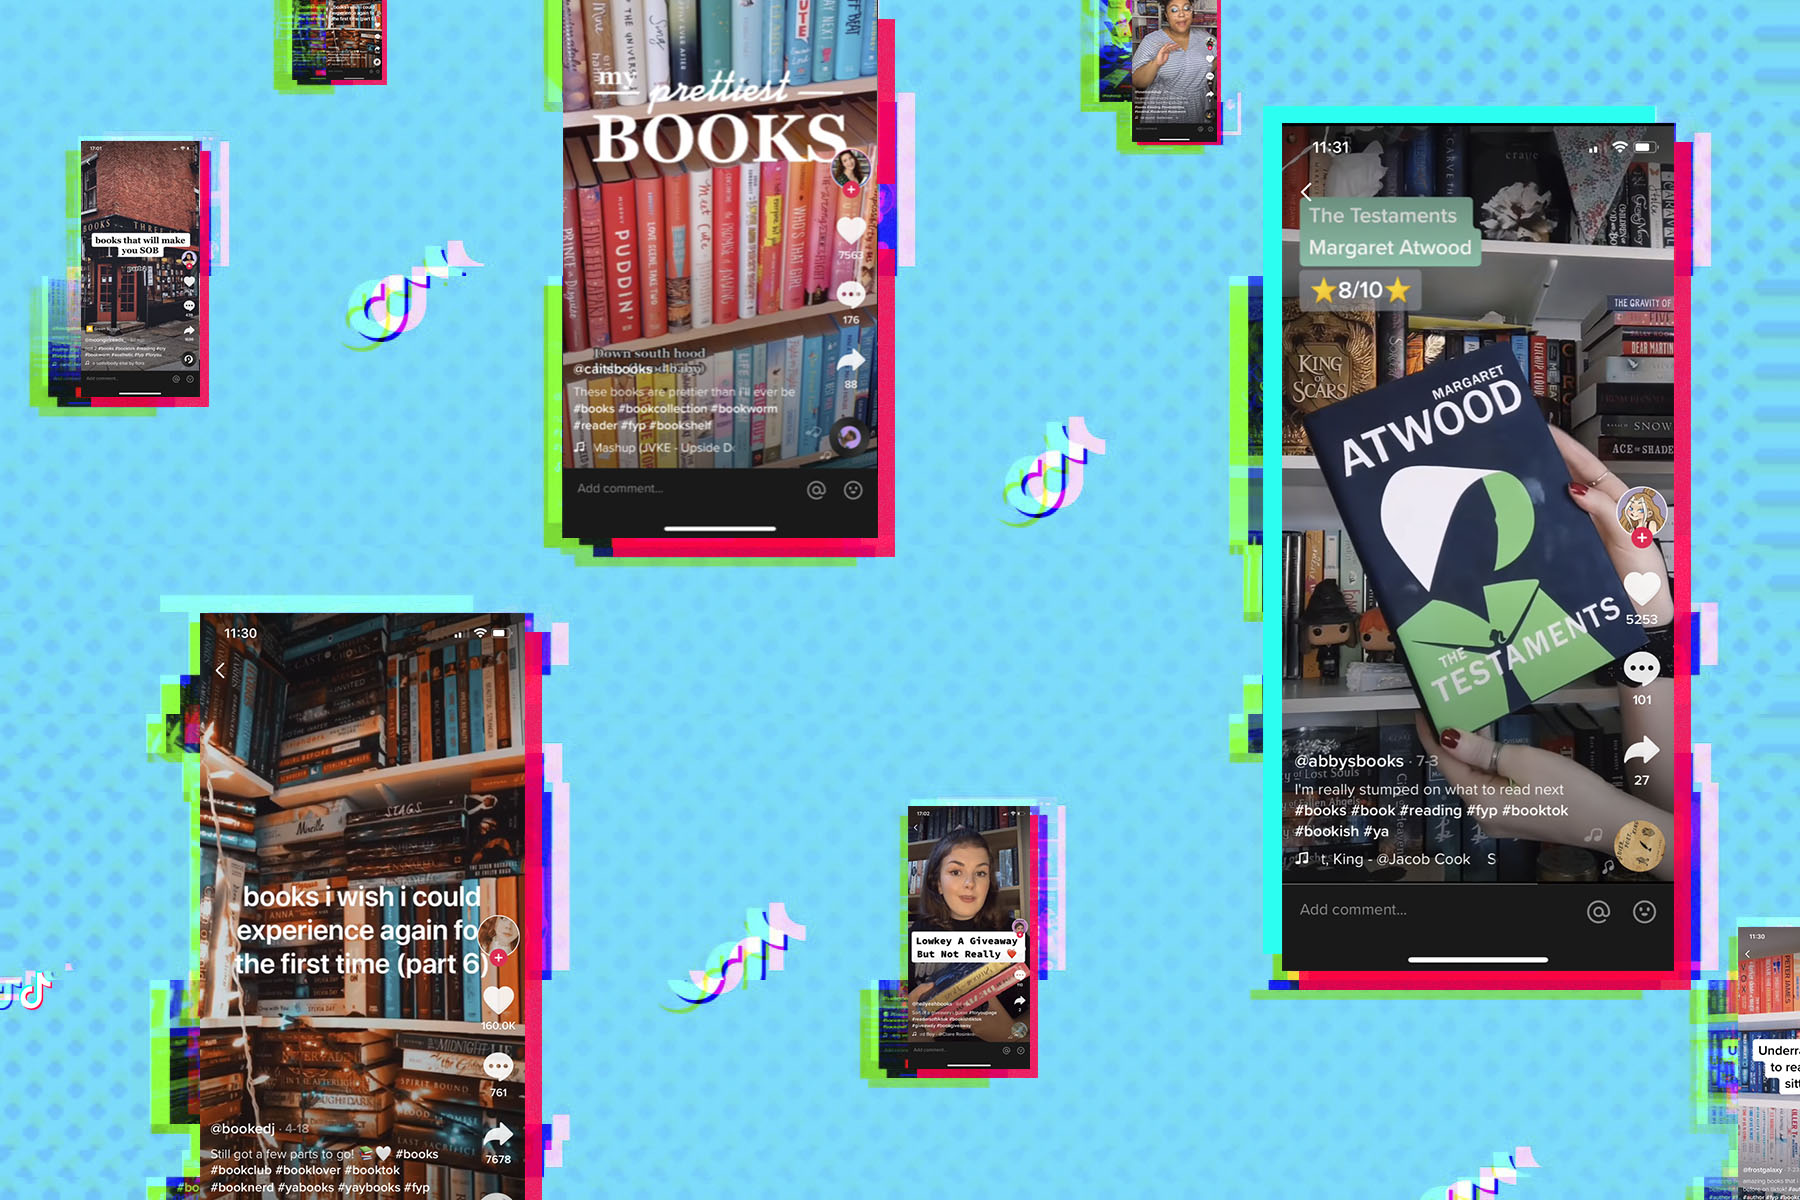 Screenshots of TikTok accounts about books against a blue background with the TikTok logo.